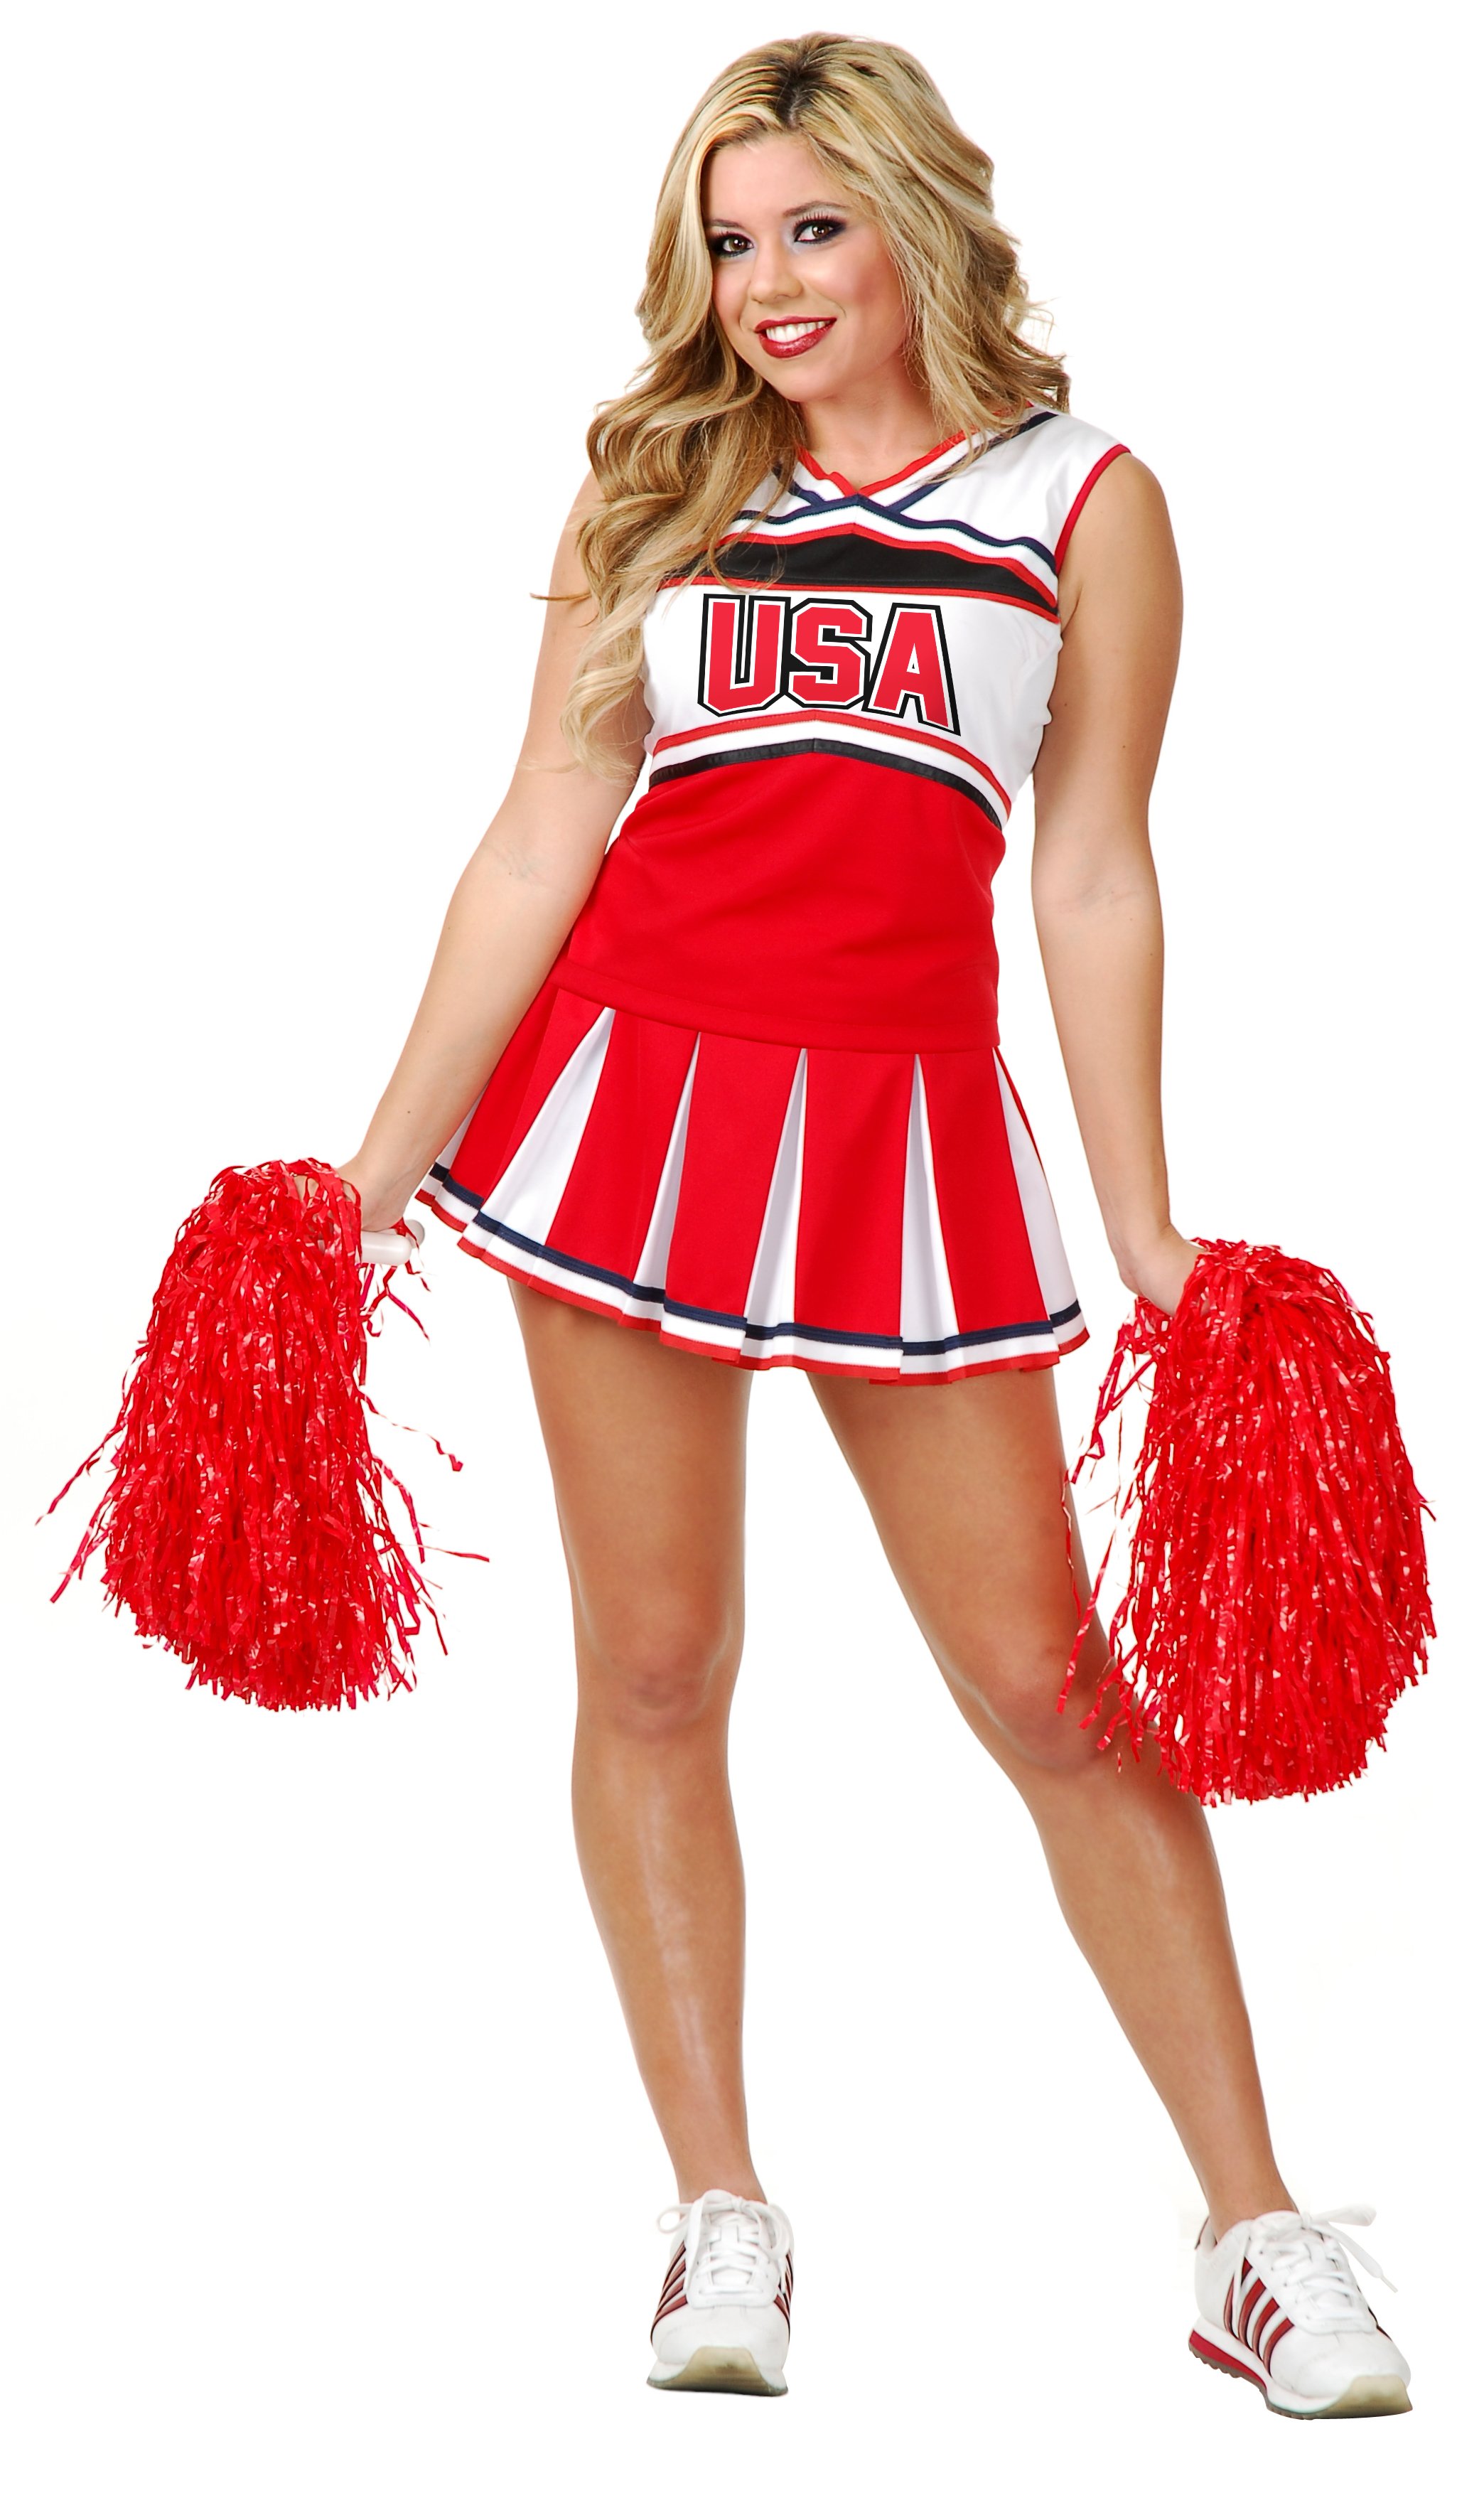 HD Quality Wallpaper | Collection: Sports, 2088x3507 Cheerleader